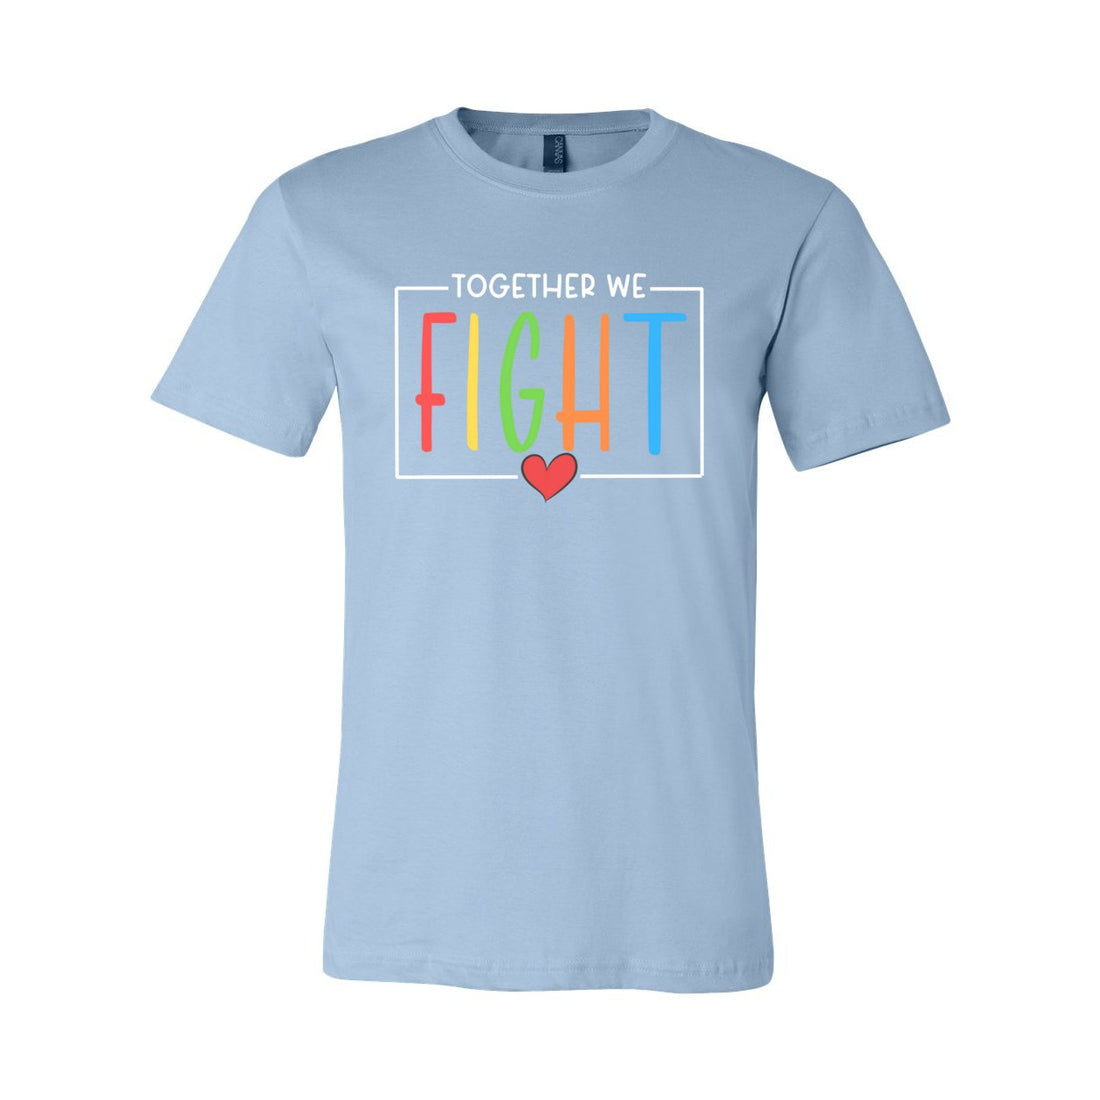 Together We Fight - T-Shirts - Positively Sassy - Together We Fight